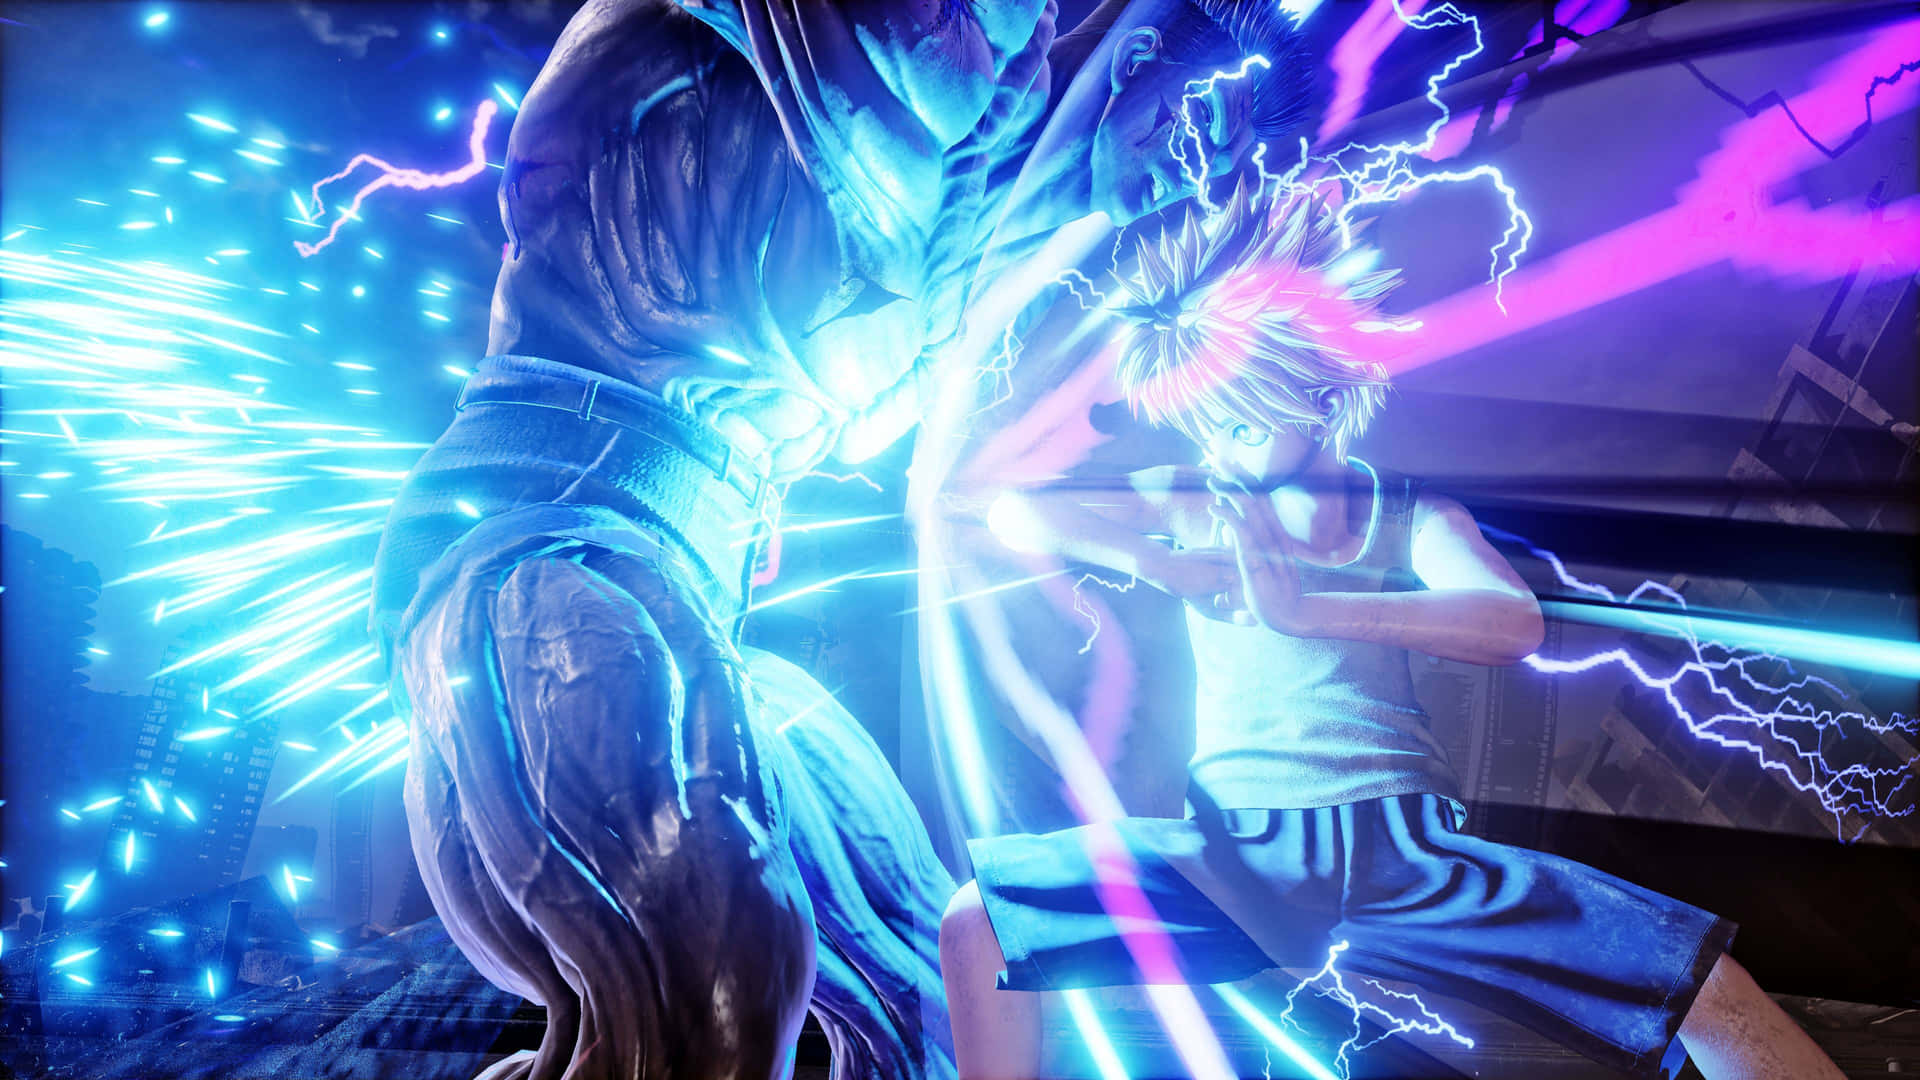 A Man Is Fighting With A Sword In Front Of A Blue Light Background